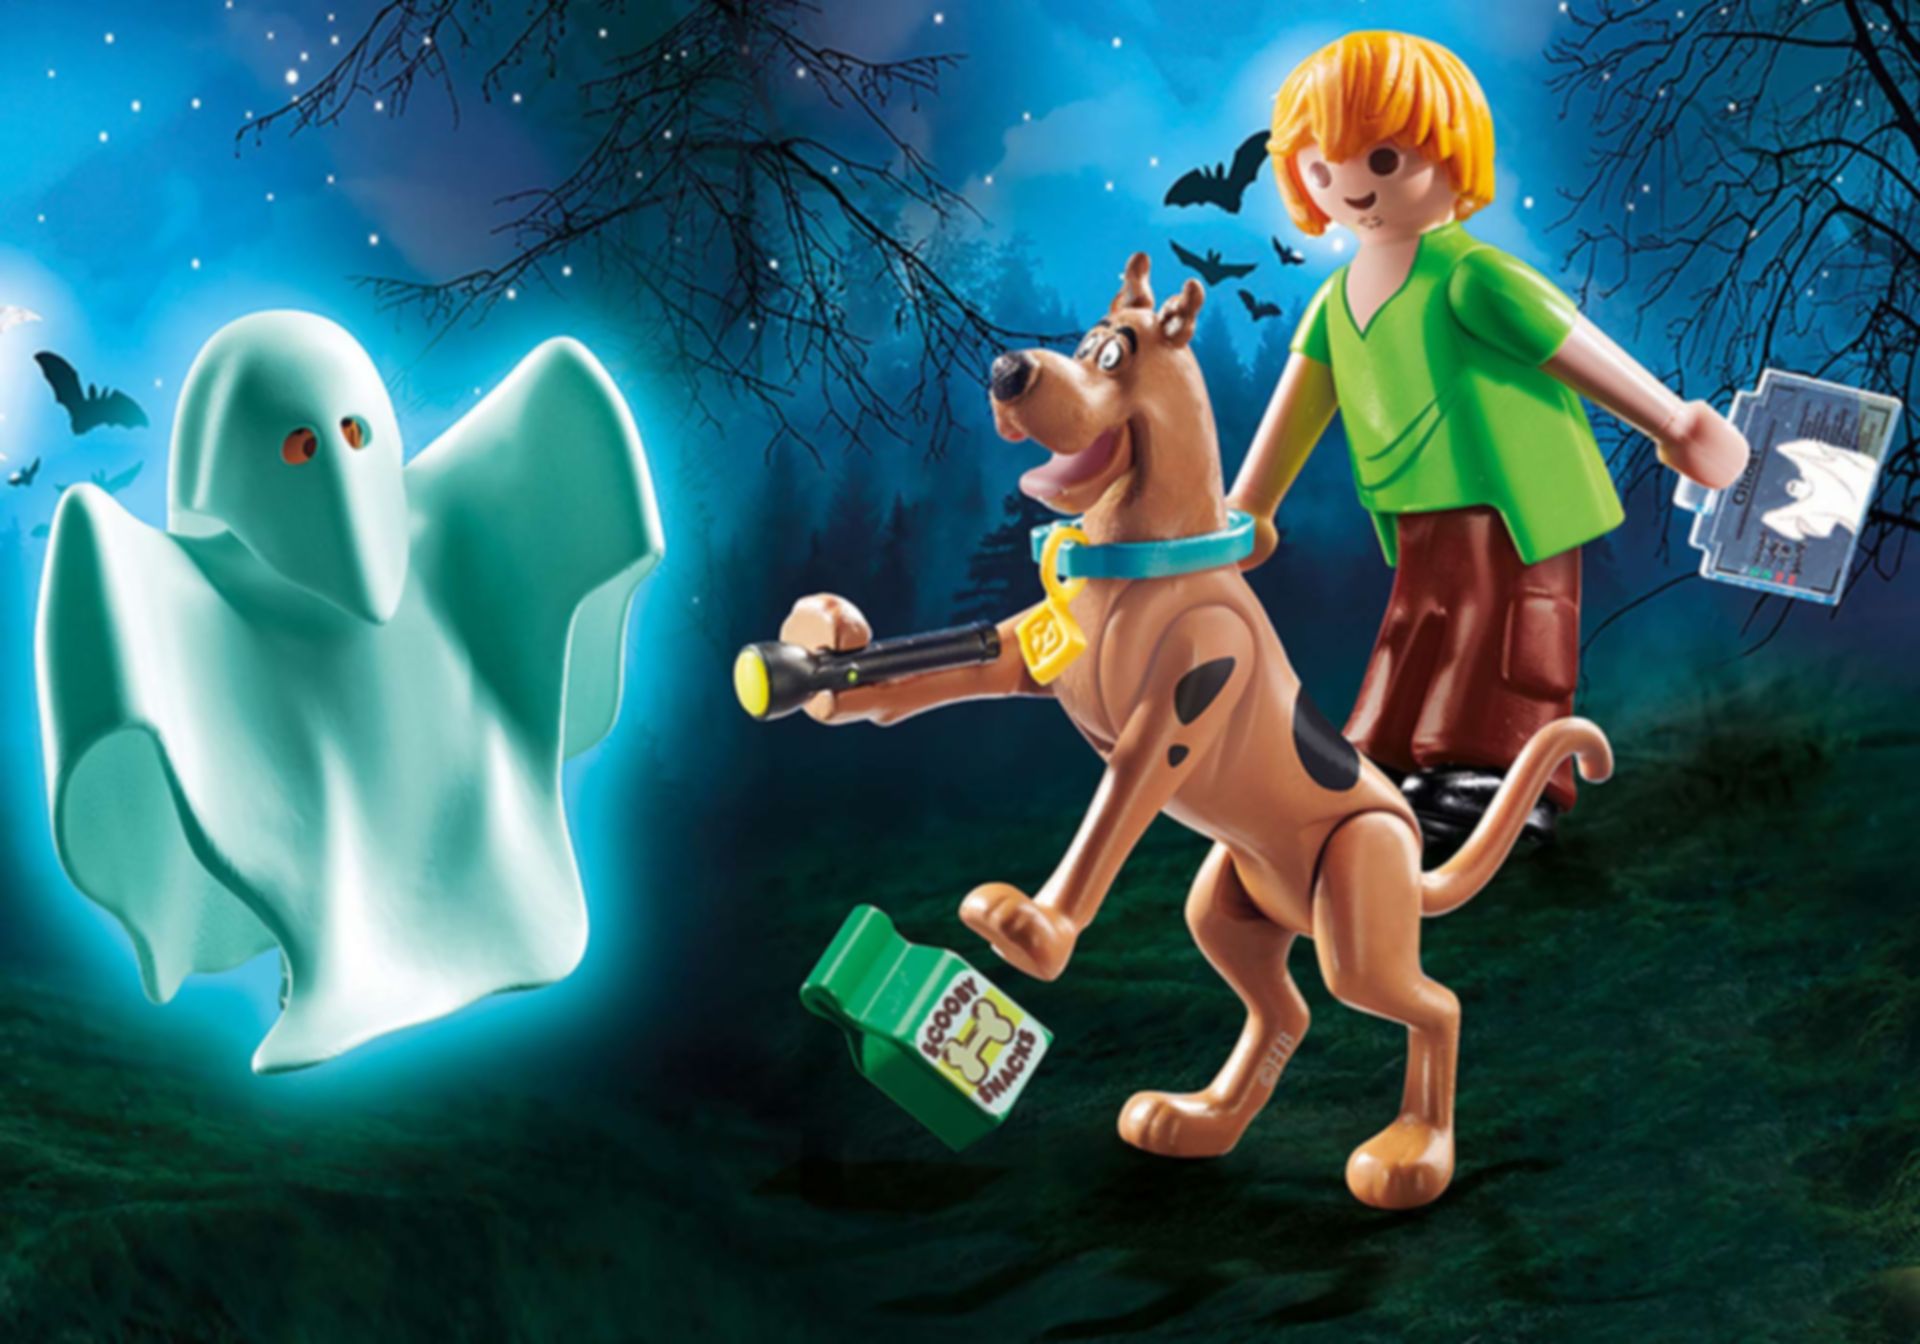 Playmobil® SCOOBY-DOO! Scooby and Shaggy with Ghost